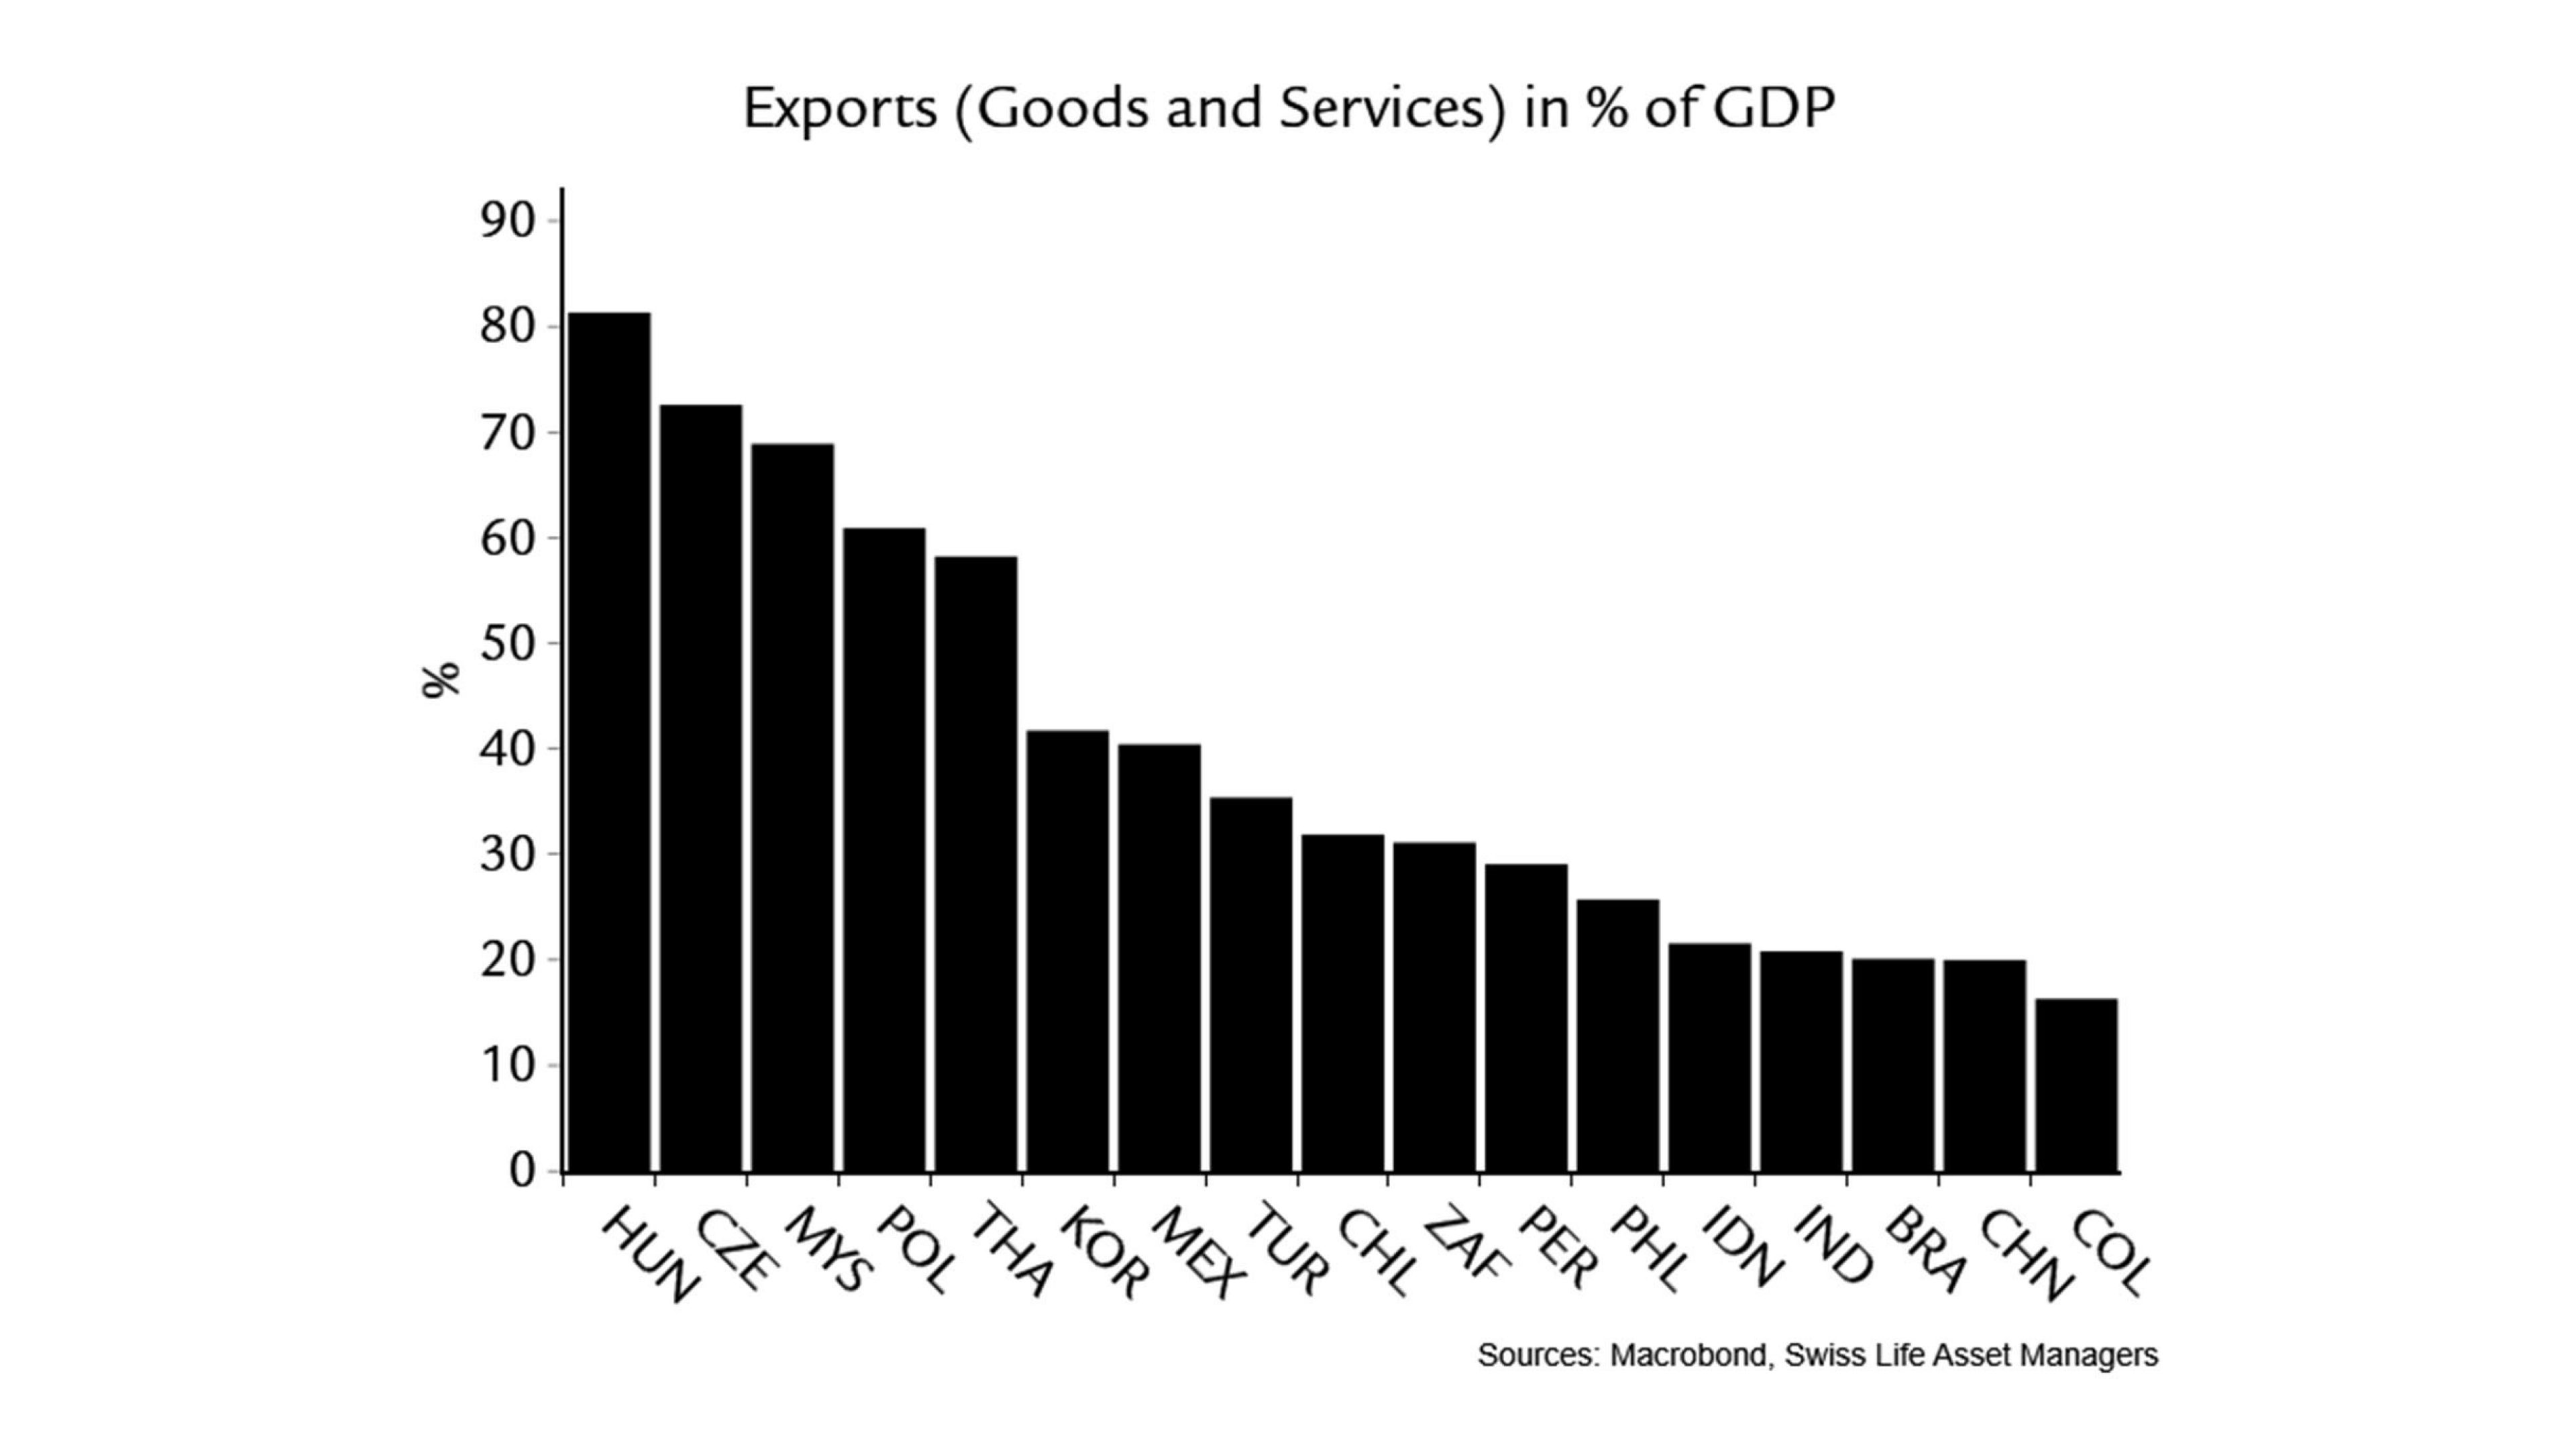 Emerging Markets Exports (Goods and Services) in % of GDP